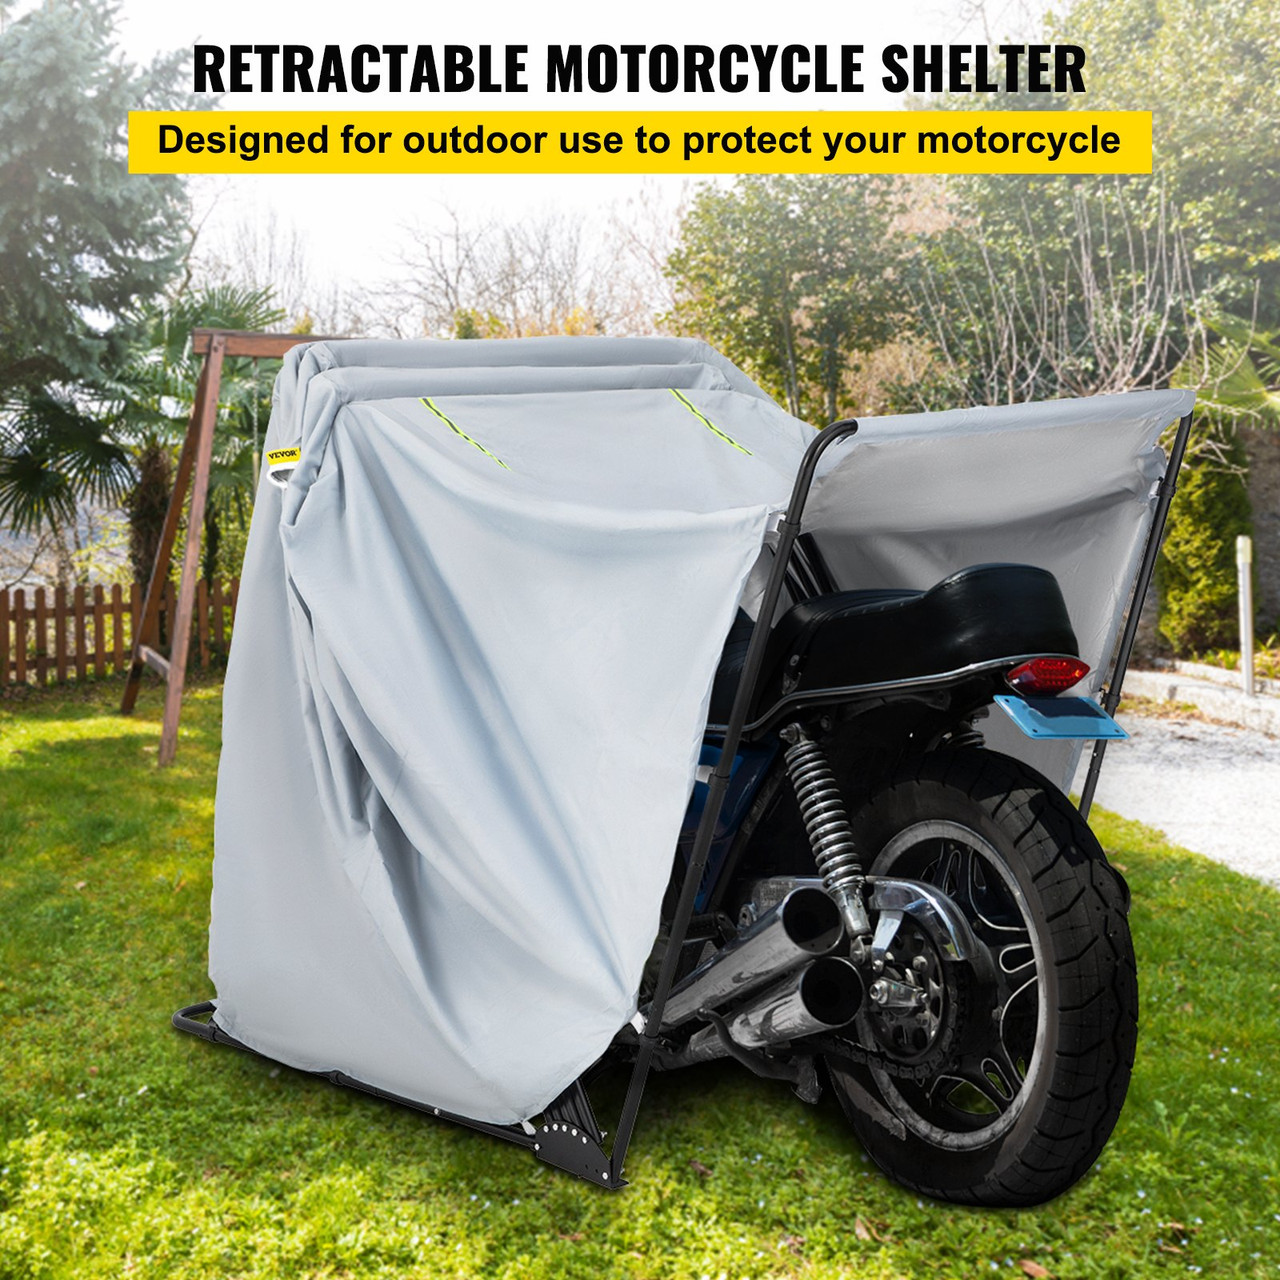 Motorcycle Shelter, Waterproof Motorcycle Cover, Heavy Duty Motorcycle Shelter Shed, 420D Oxford Motorbike Shed Anti-UV, 106.3"x41.3"x62.9" Silver Shelter Storage Tent with Lock & Weight Bag